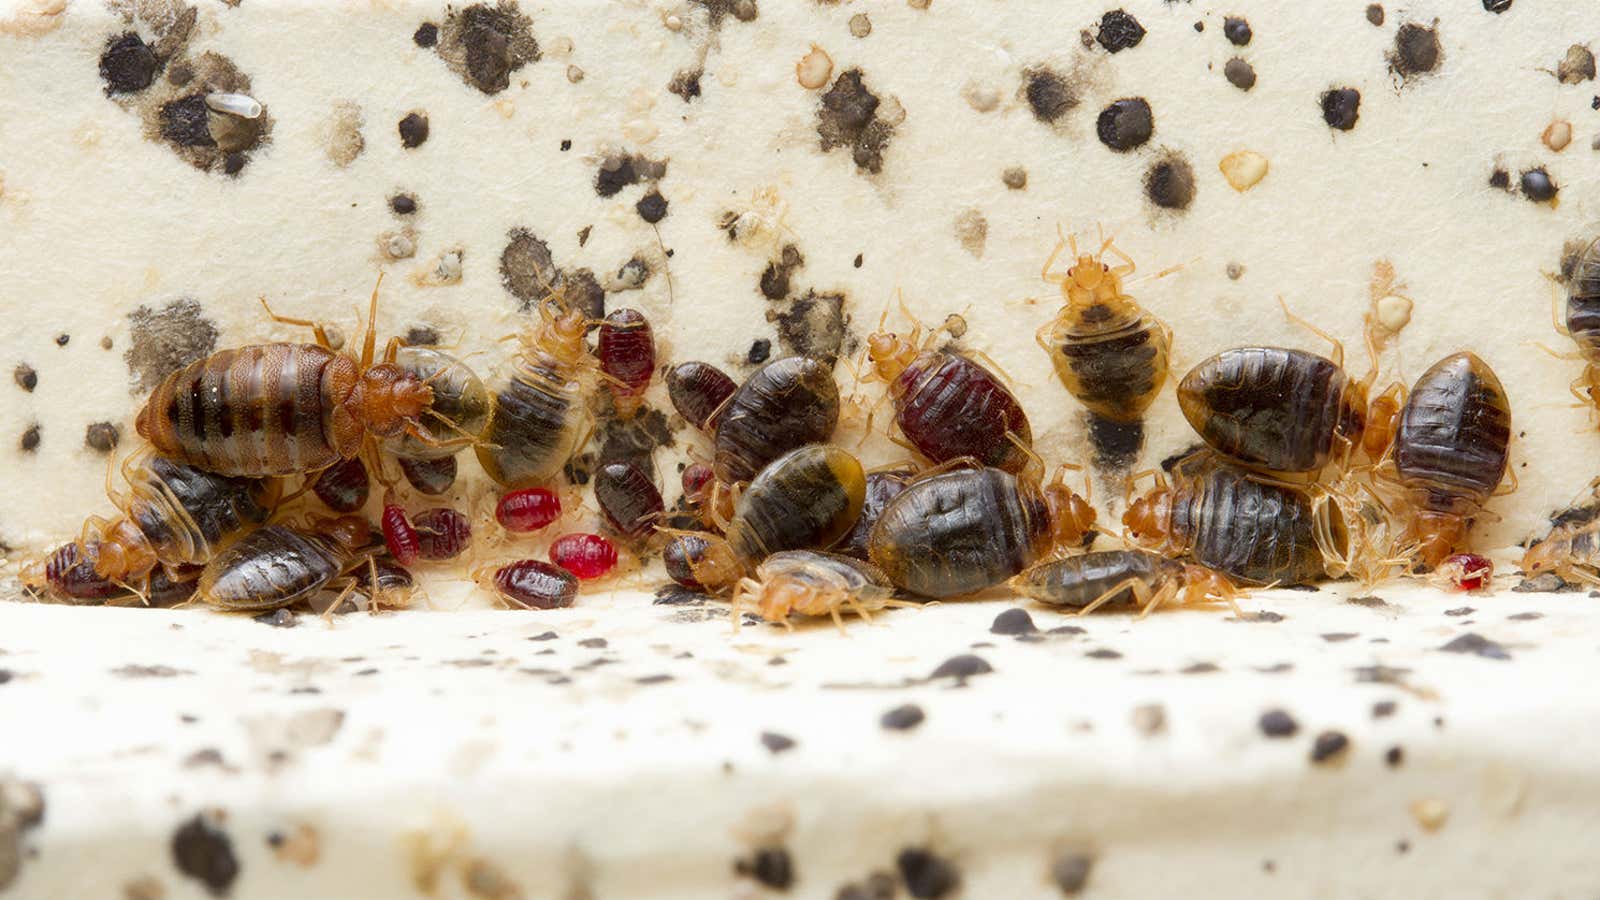 4 Shocking Ways Bed Bugs Get into Your Home